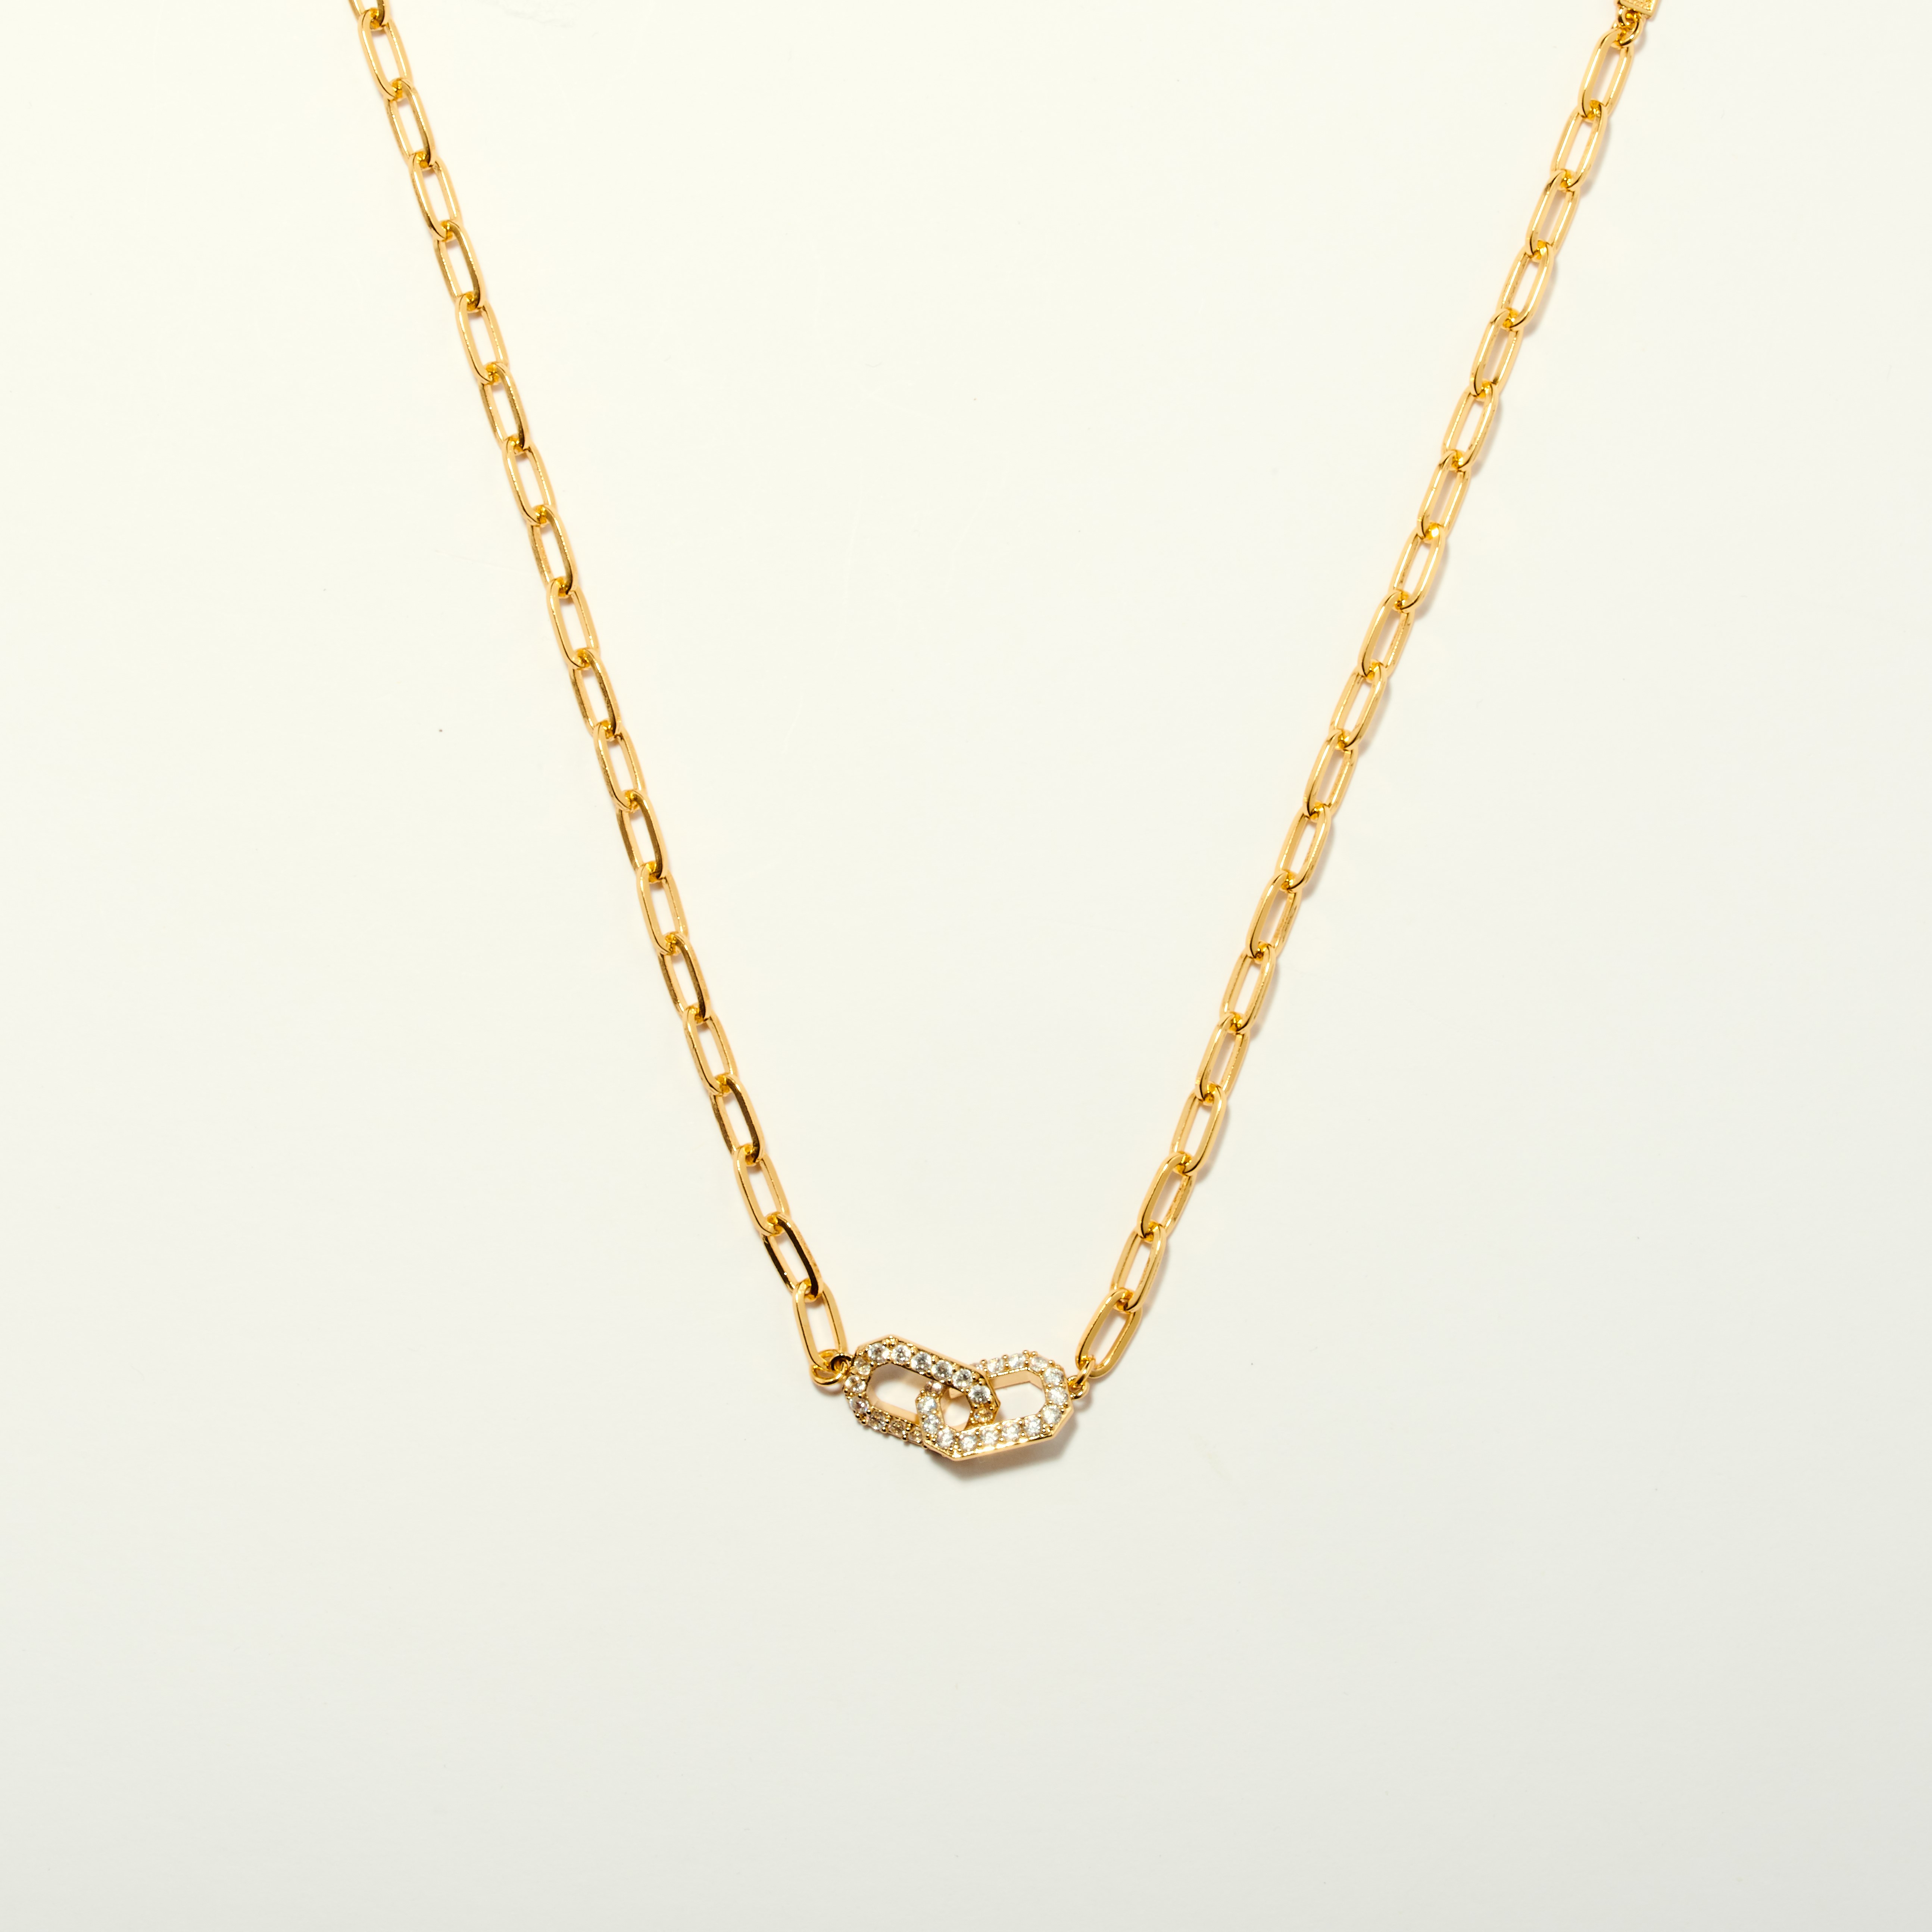 COMMITMENT PAVE GOLD LINK NECKLACE